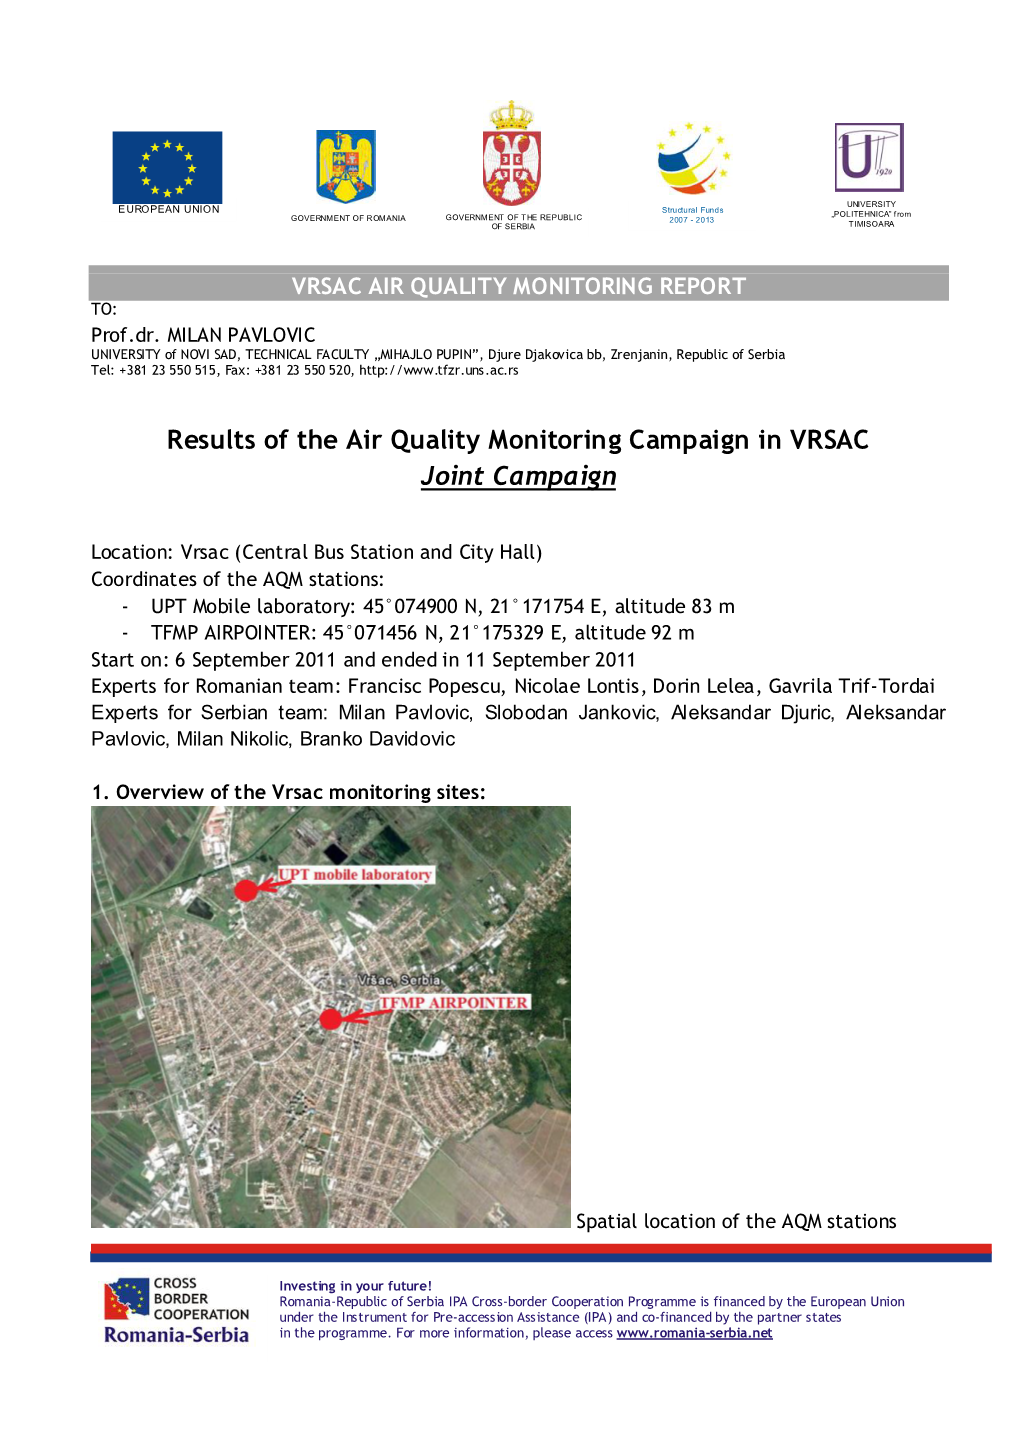 Results of the Air Quality Monitoring Campaign in VRSAC Joint Campaign